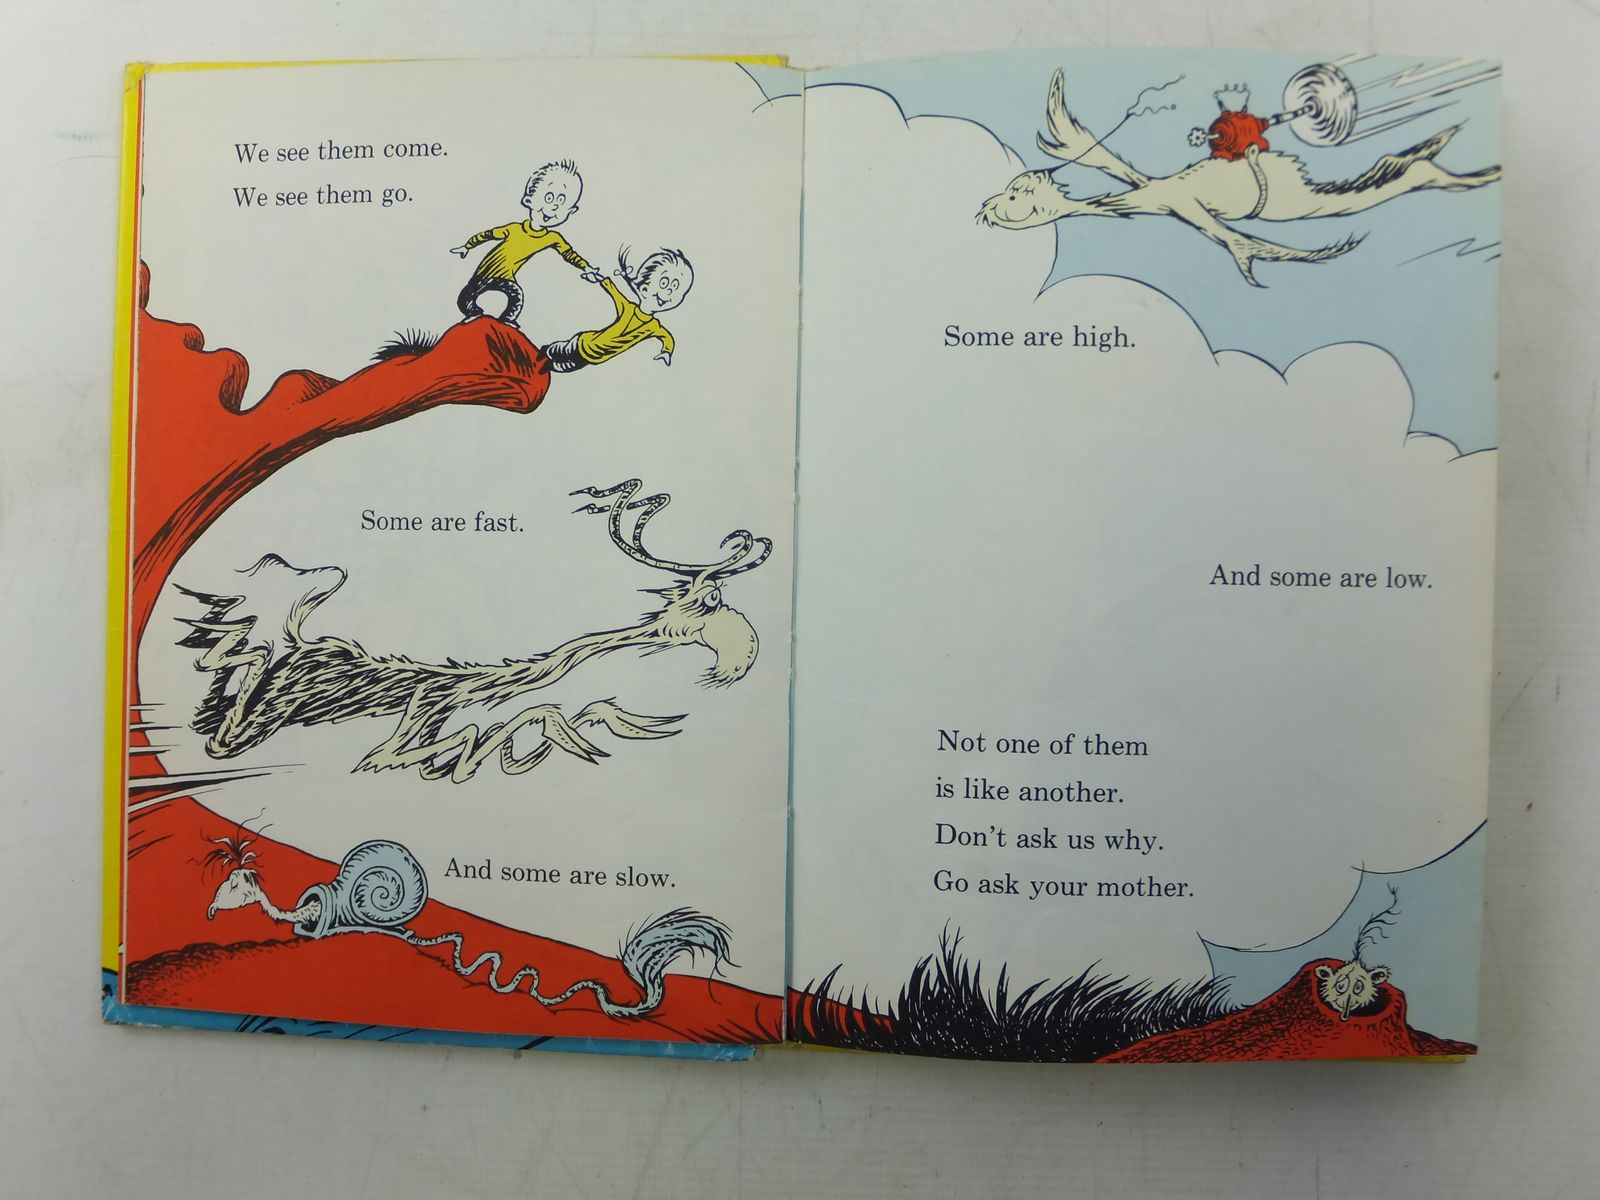 Photo of ONE FISH, TWO FISH, RED FISH, BLUE FISH written by Seuss, Dr. illustrated by Seuss, Dr. published by Random House (STOCK CODE: 1607739)  for sale by Stella & Rose's Books